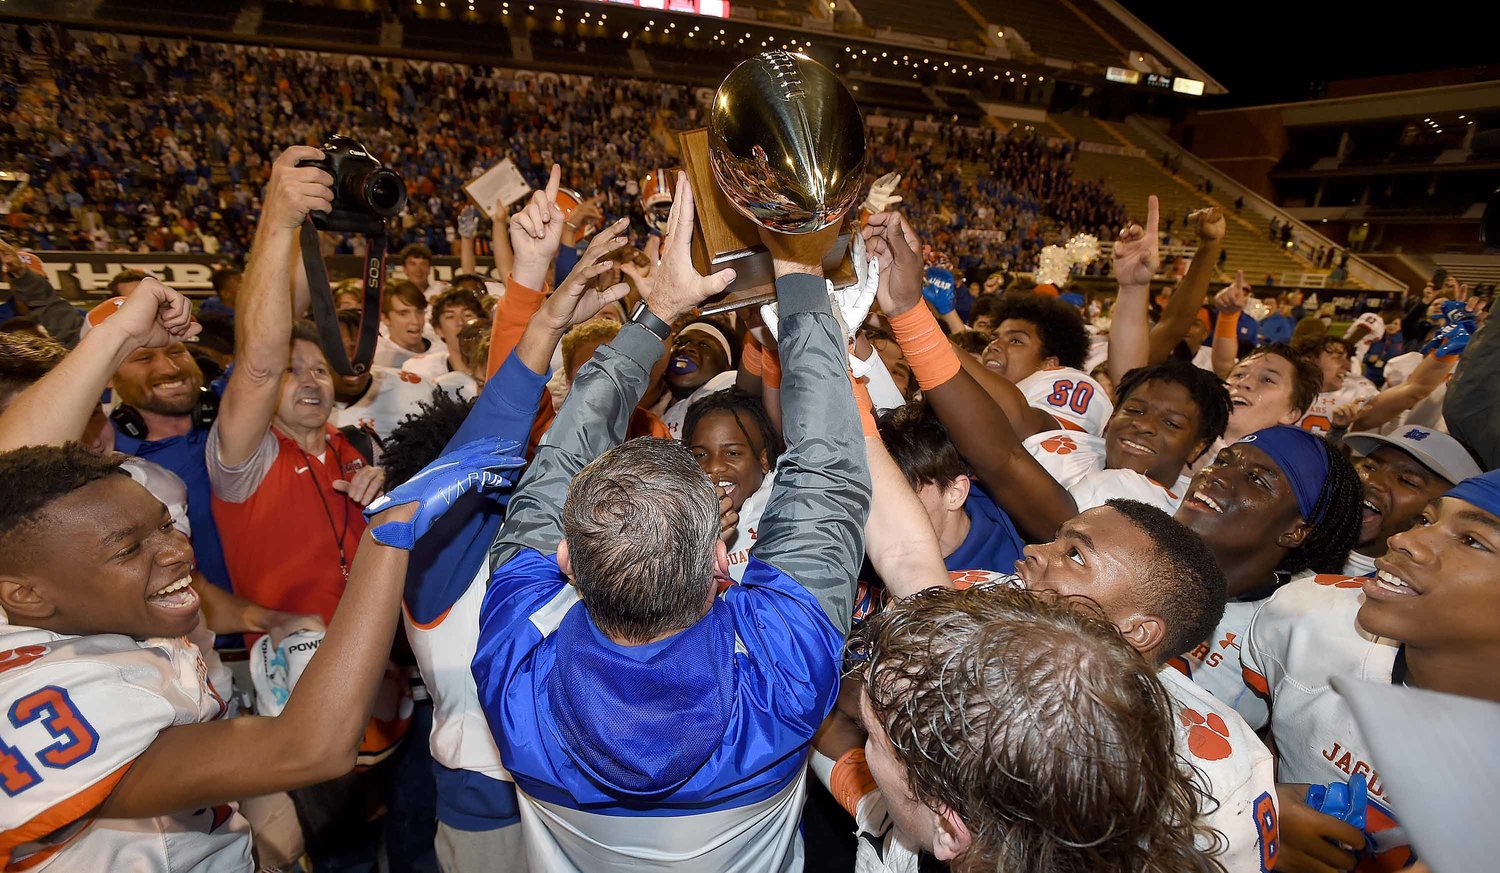 Madison Central head coach Toby Collums hands the trophy to the Jaguars after beating Brandon in the MHSAA Class 6A Football State Championship game at M.M. Roberts Stadium on the University of Southern Mississippi campus in Hattiesburg, Miss., on Friday, December 3, 2021.